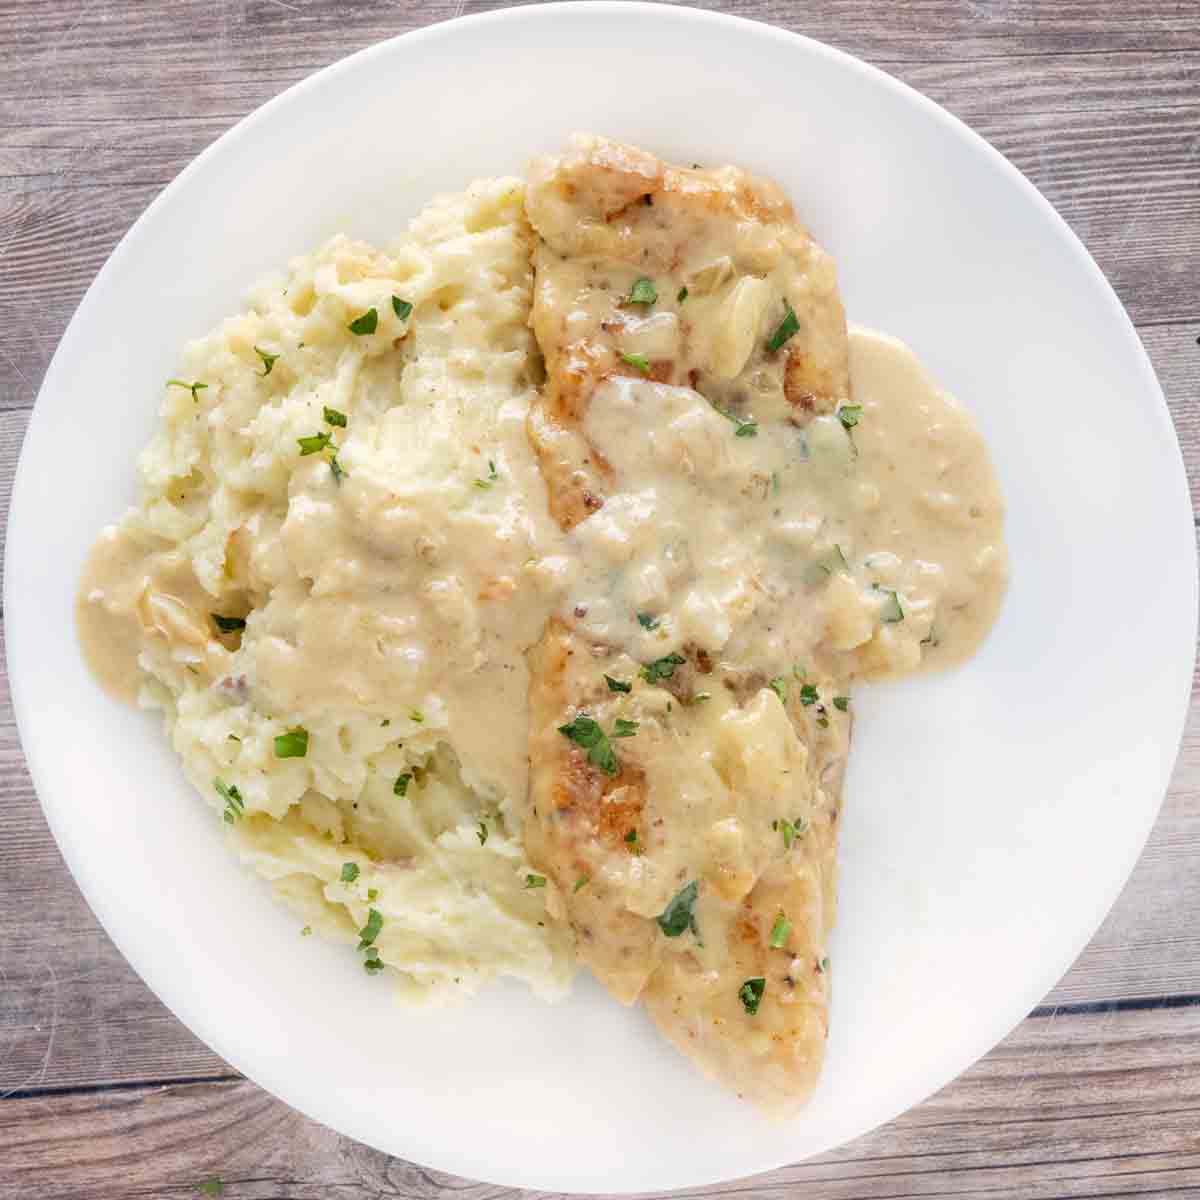 Creamy garlic chicken with mashed potatoes on a white plate.